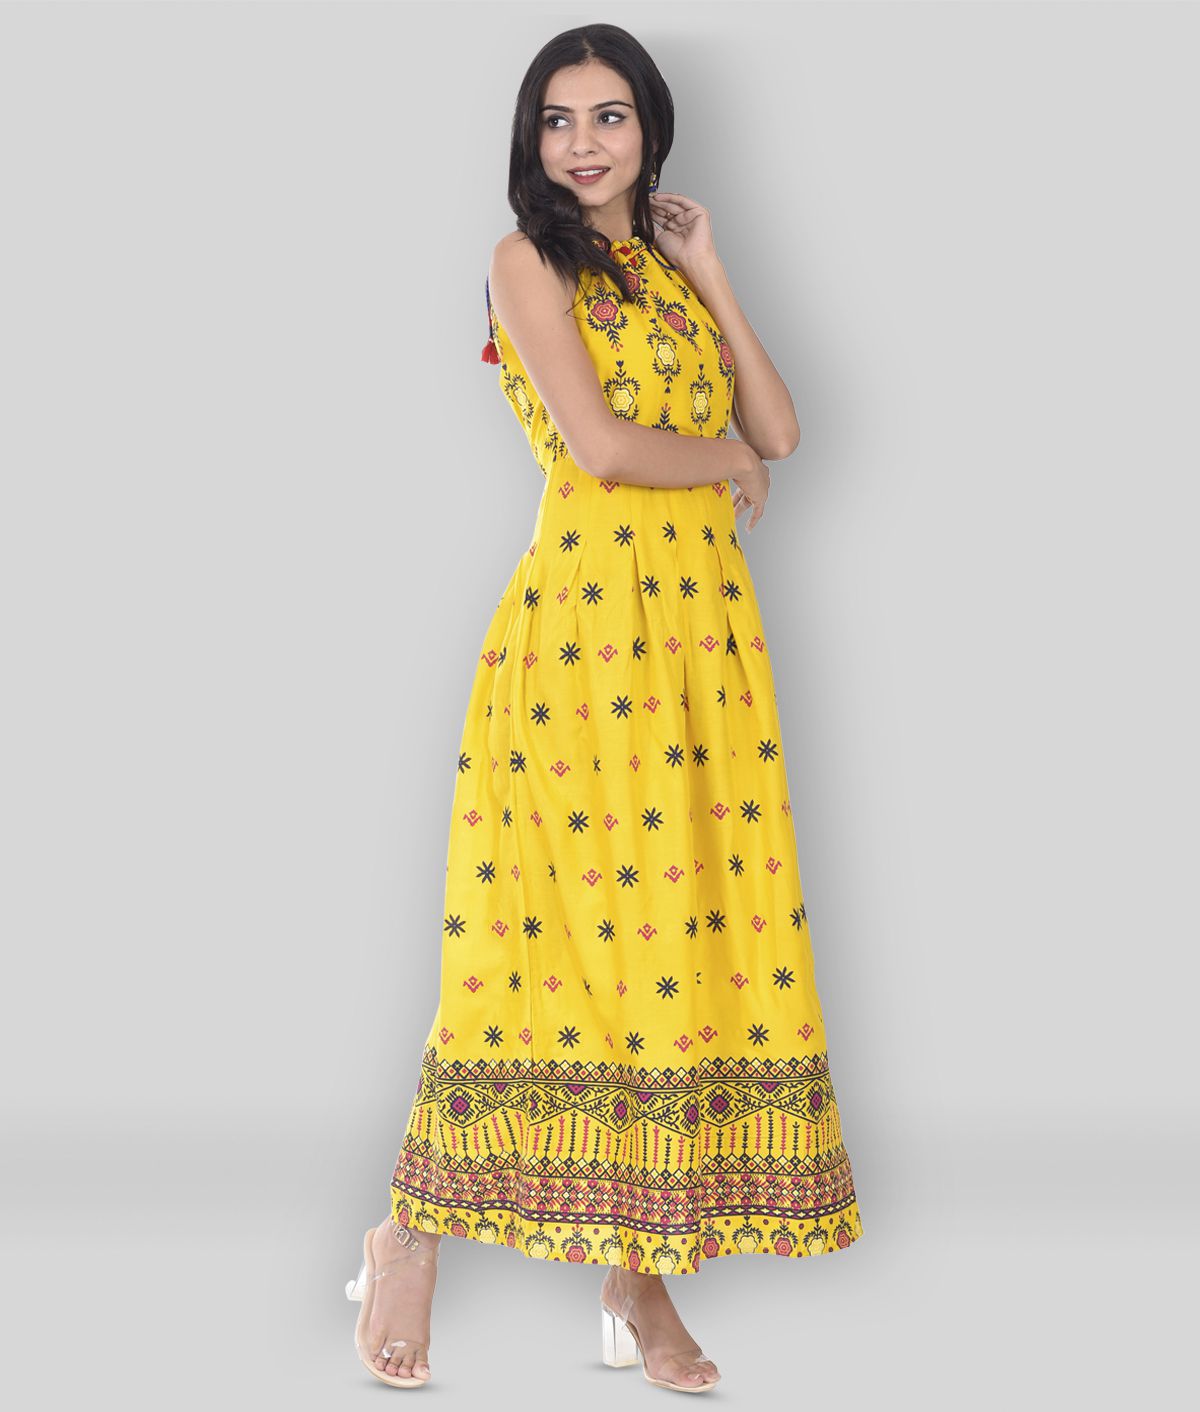     			EXPORTHOUSE - Yellow Rayon Women's A- line Dress ( Pack of 1 )